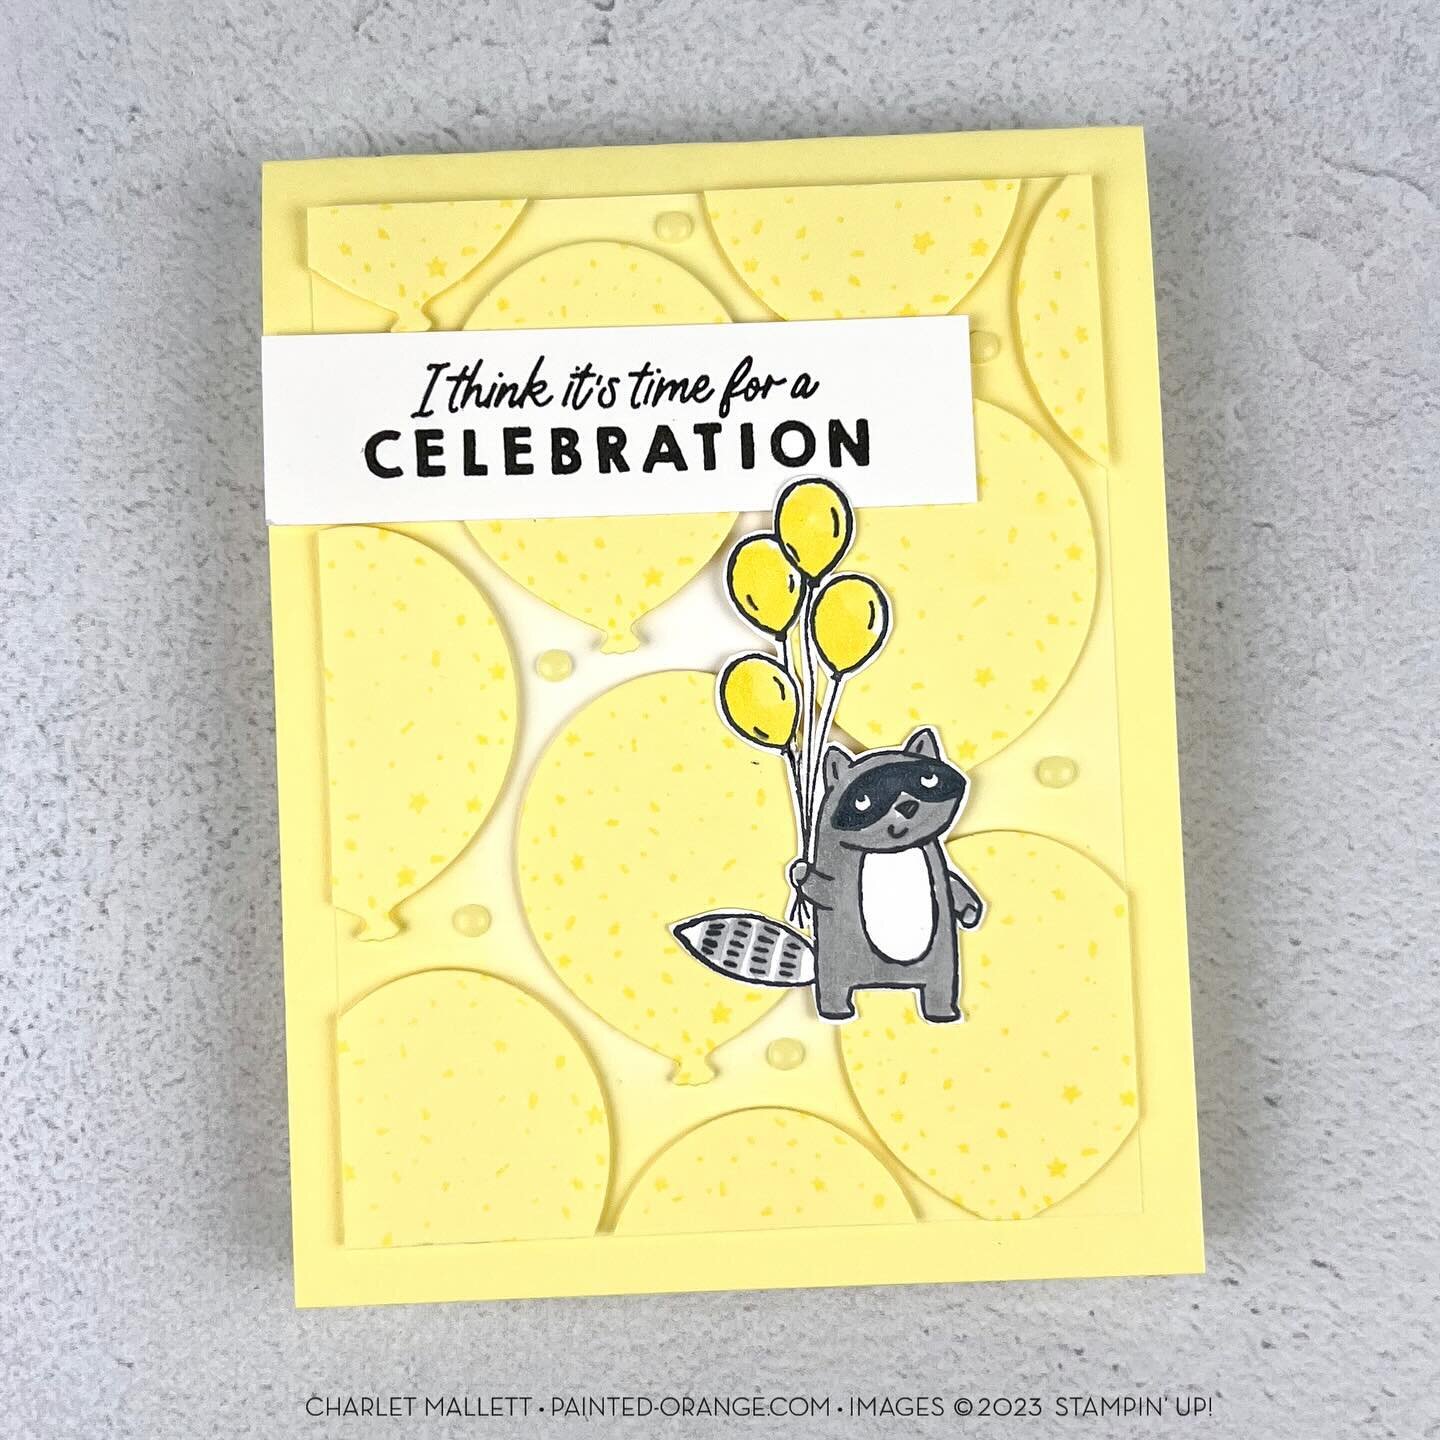 Balloon crazy! Here&rsquo;s a closer look at the finished card I created for #gdp431 balloon theme challenge using the Zany Zoo stamp set and a balloon die from Birthday Balloons. Play along and see more inspiration @global_design_project 
.
.
#stamp